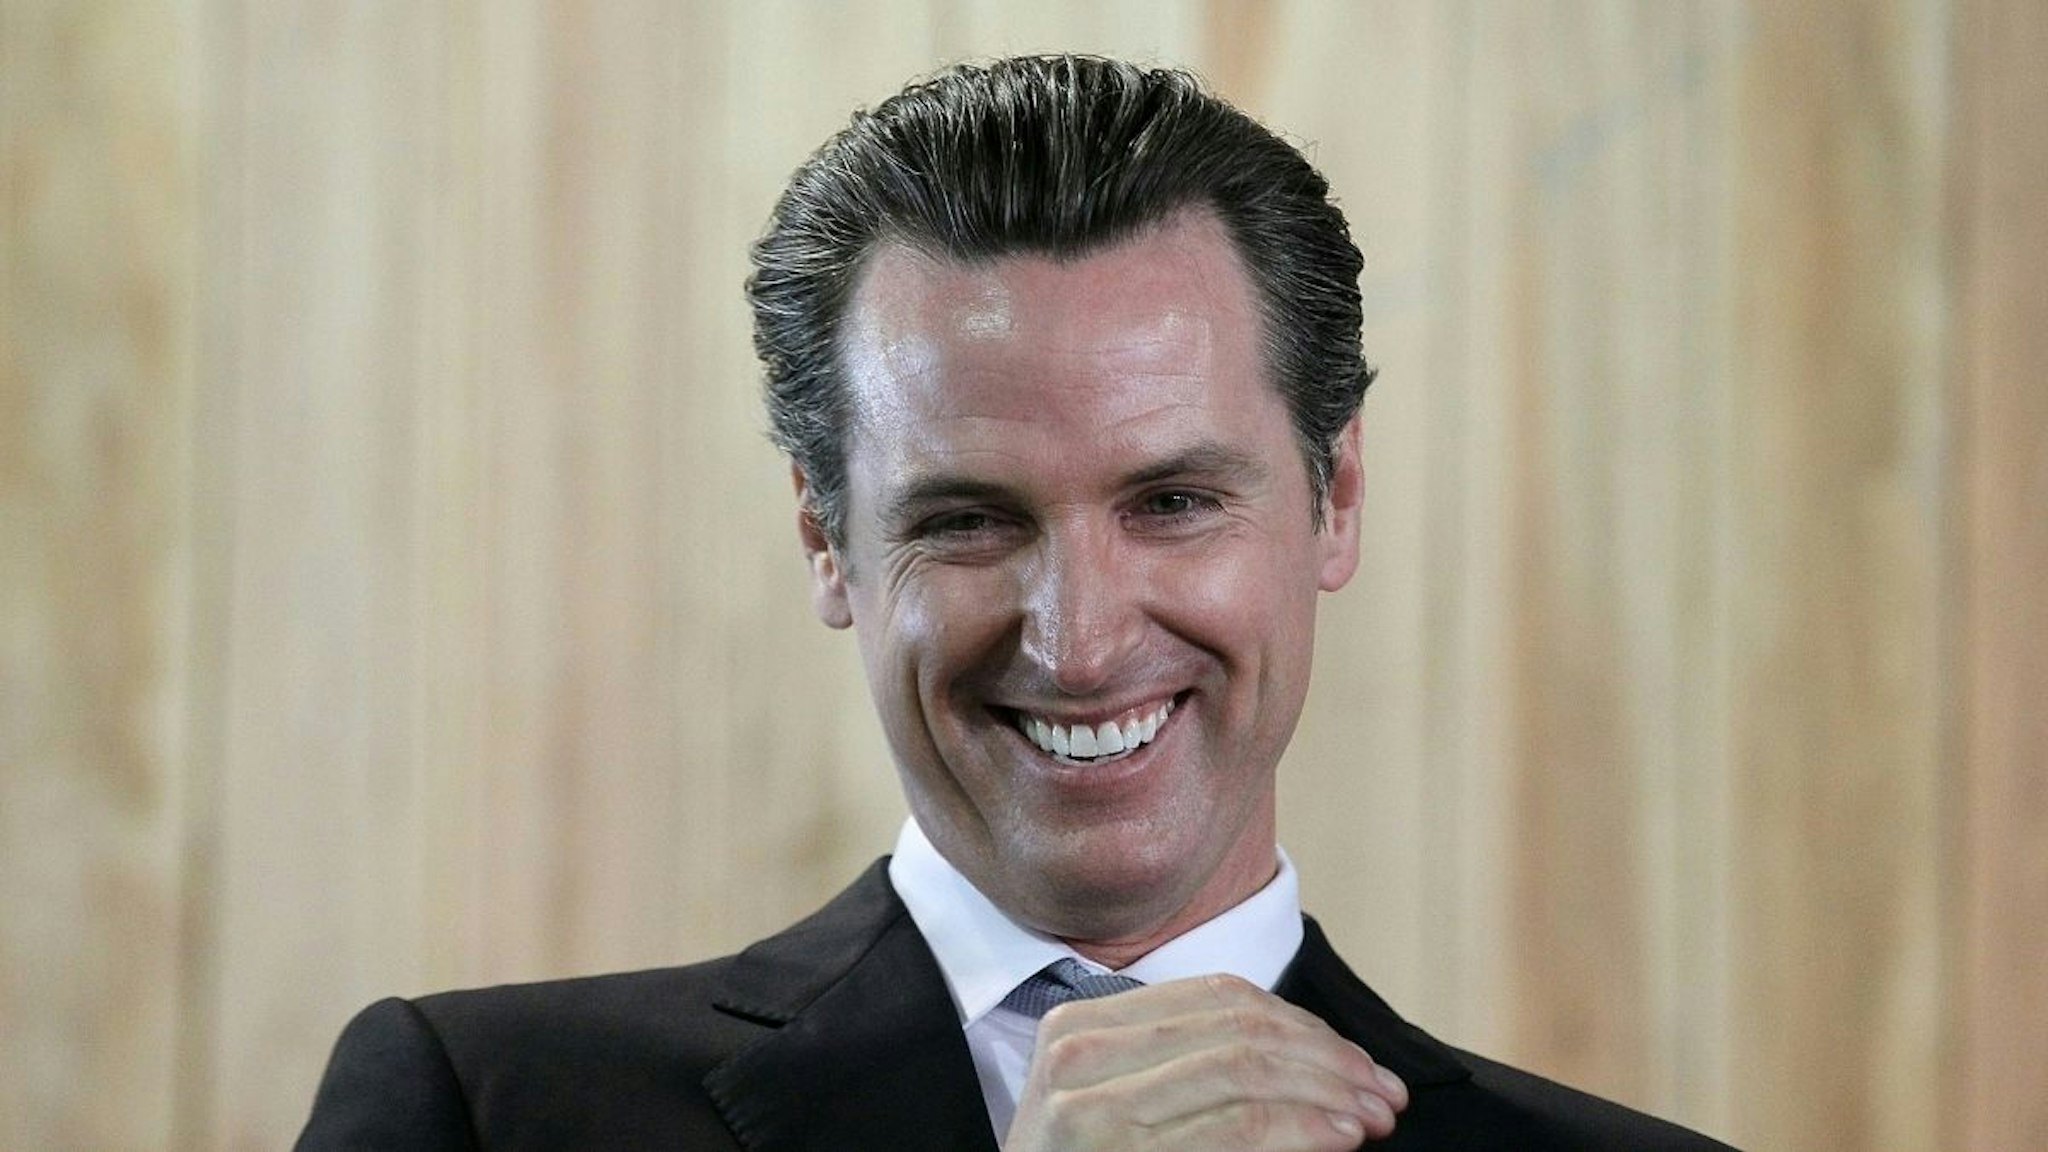 San Francisco mayor and California Lt. Governor-elect Gavin Newsom smiles during a ribbon cutting during the grand opening of the Lowe's store on November 4, 2010 in San Francisco, California.